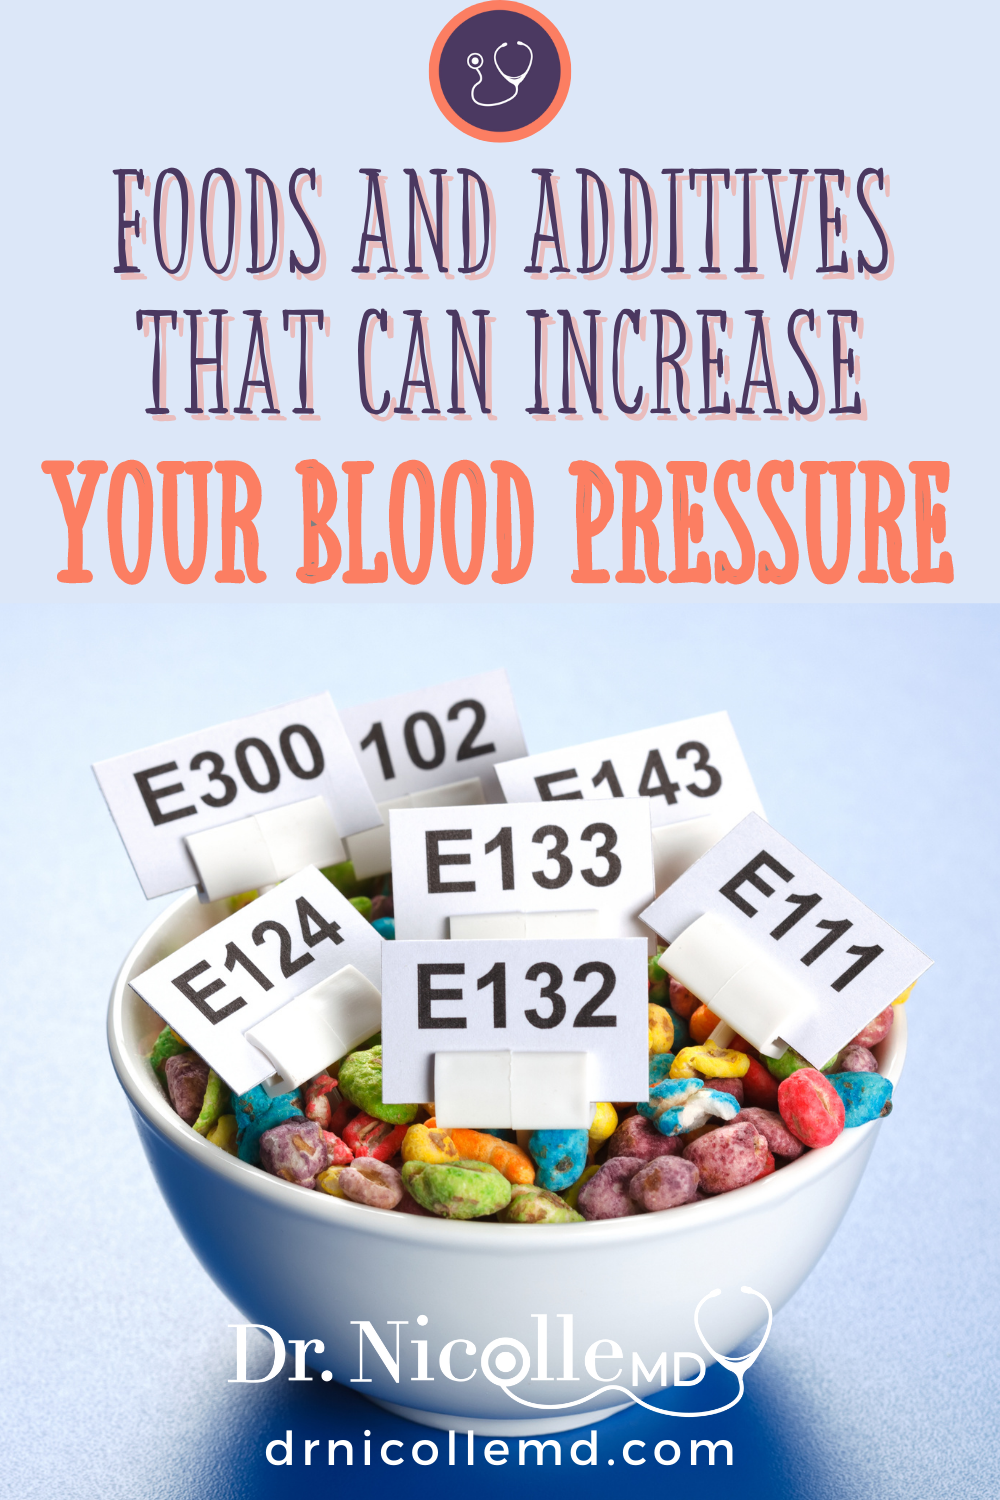 Foods And Additives That Can Increase Your Blood Pressure